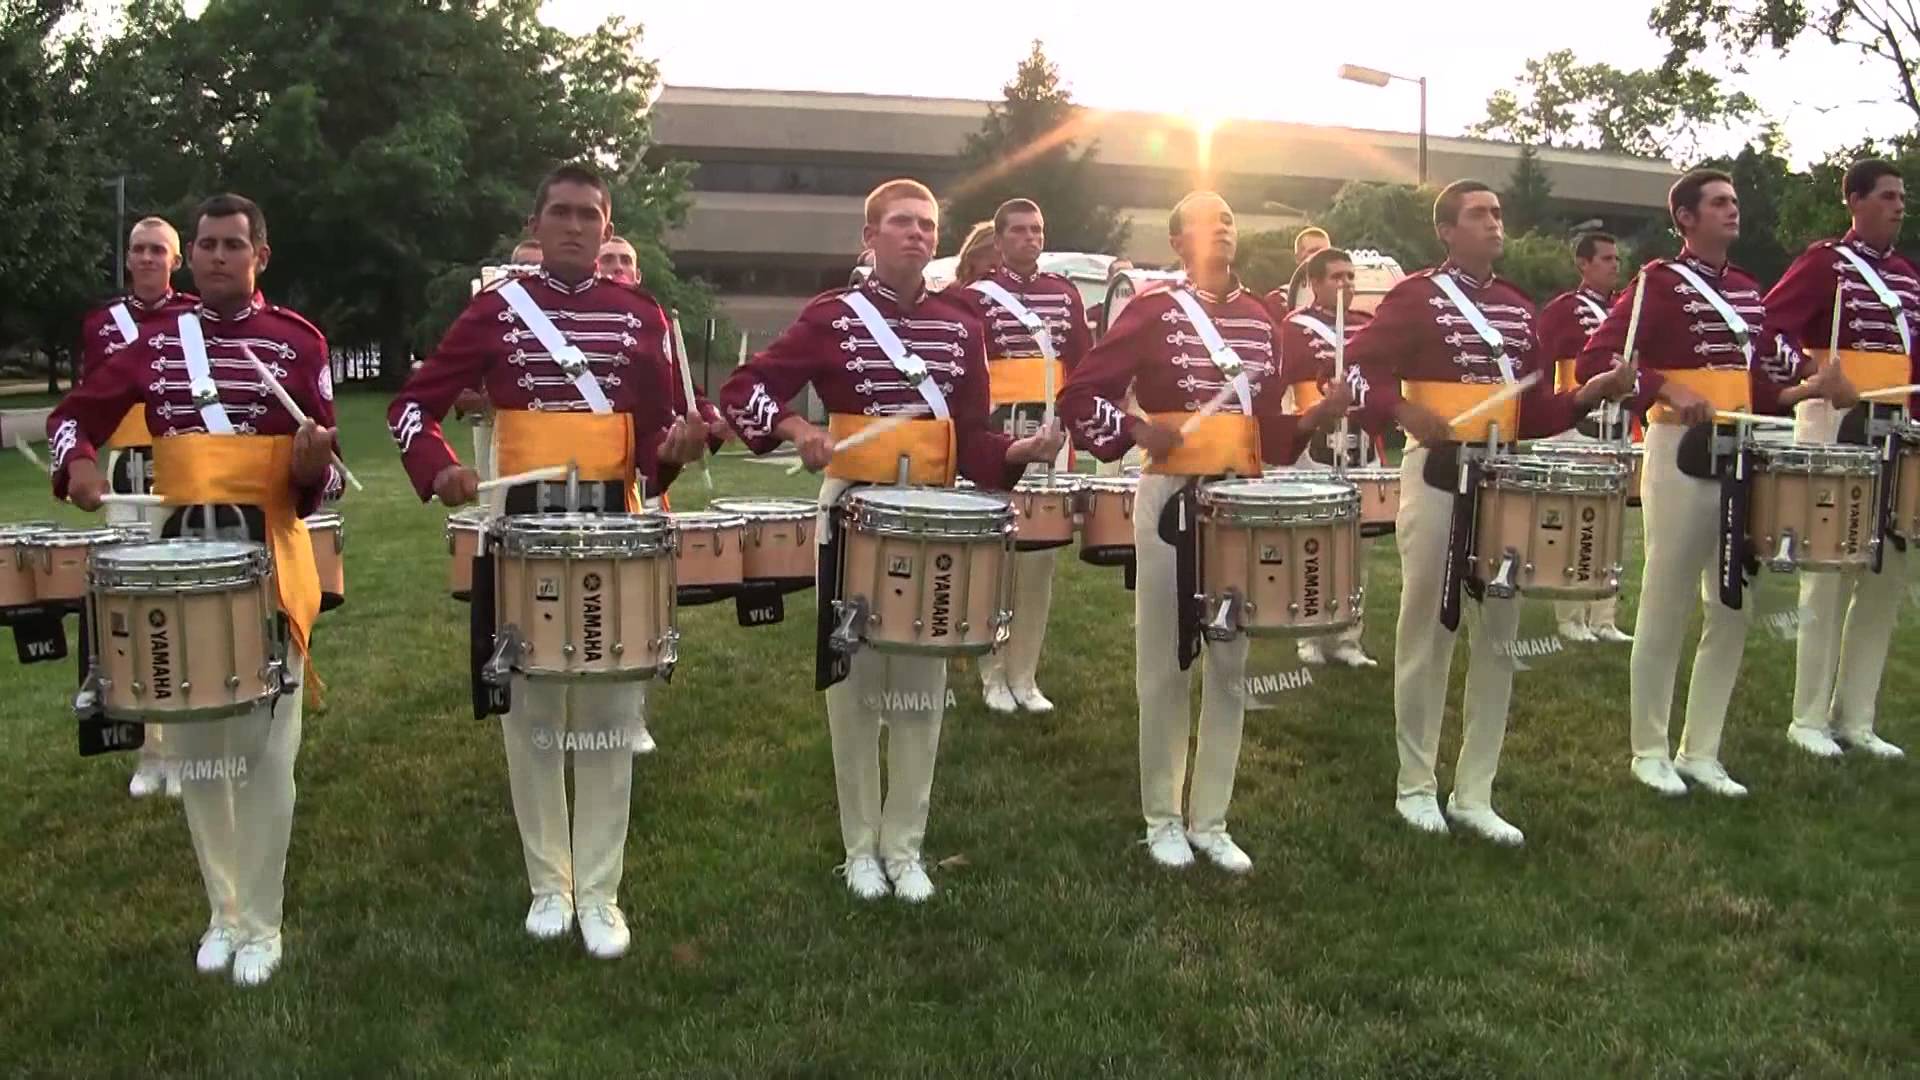 The Cadets Drumline 2013 - Akron, OH - YouTube